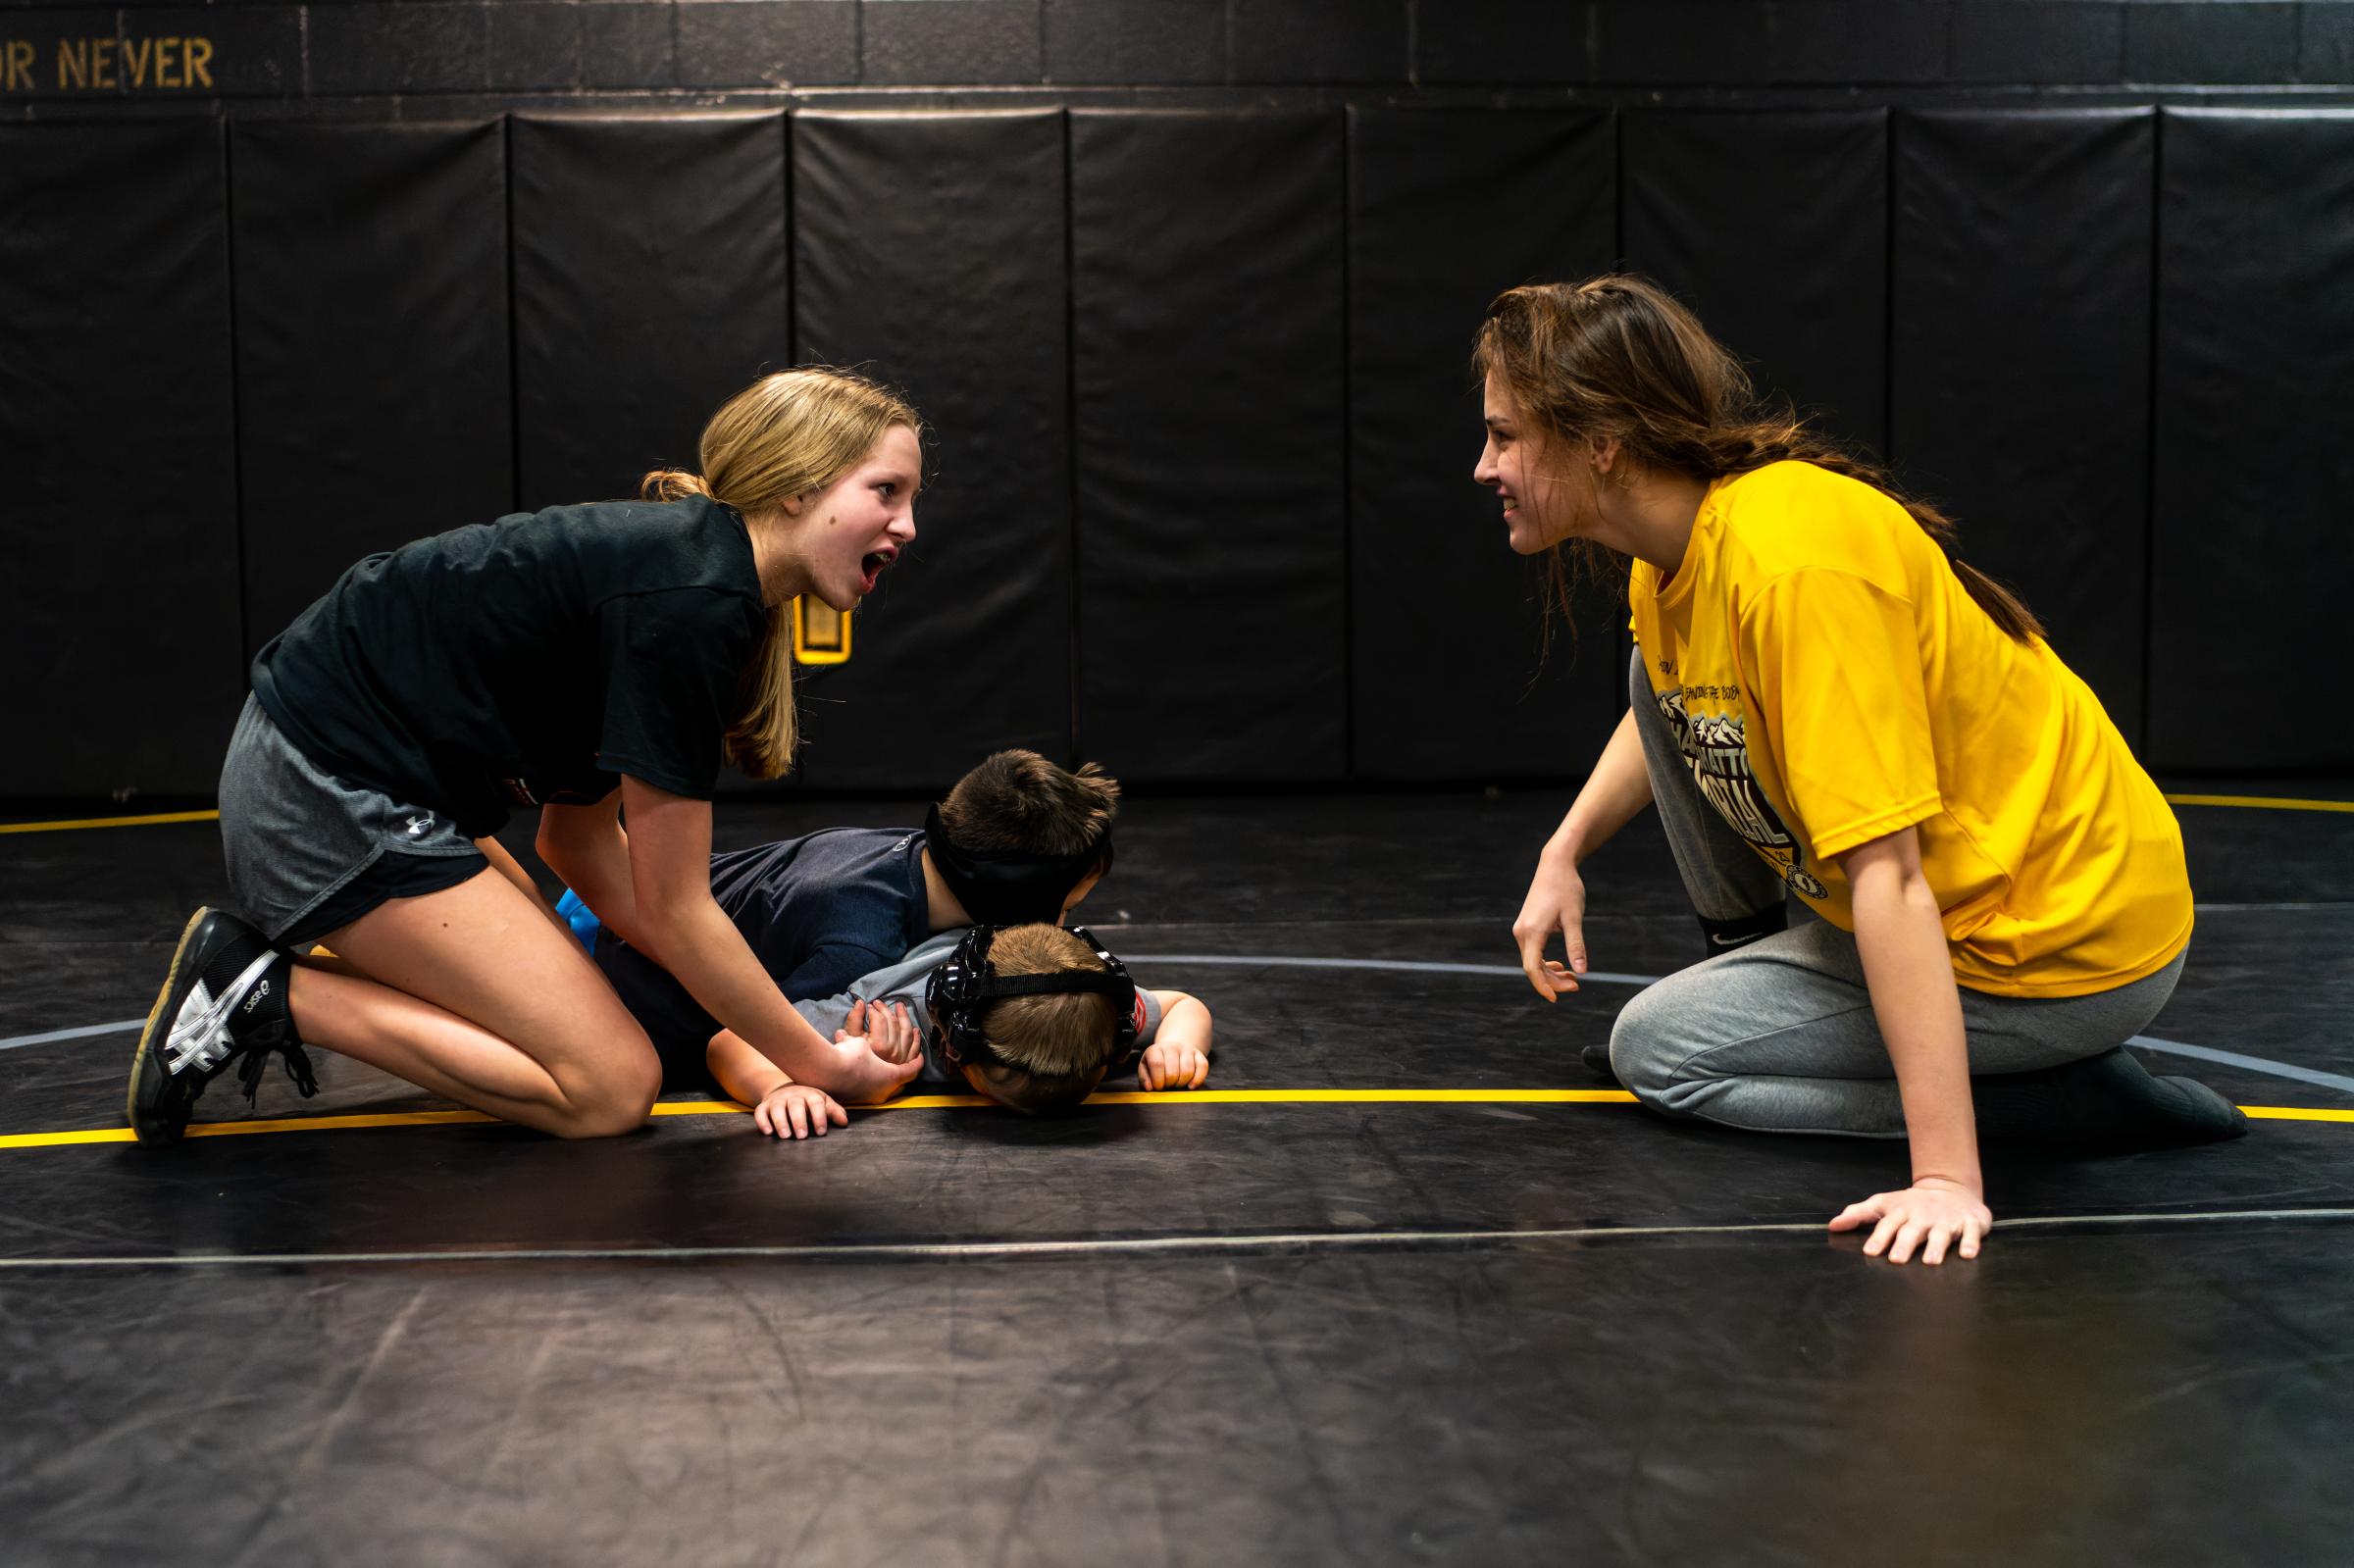 Building a Champion - Wrestling runs in the Peters family. Teila’s...